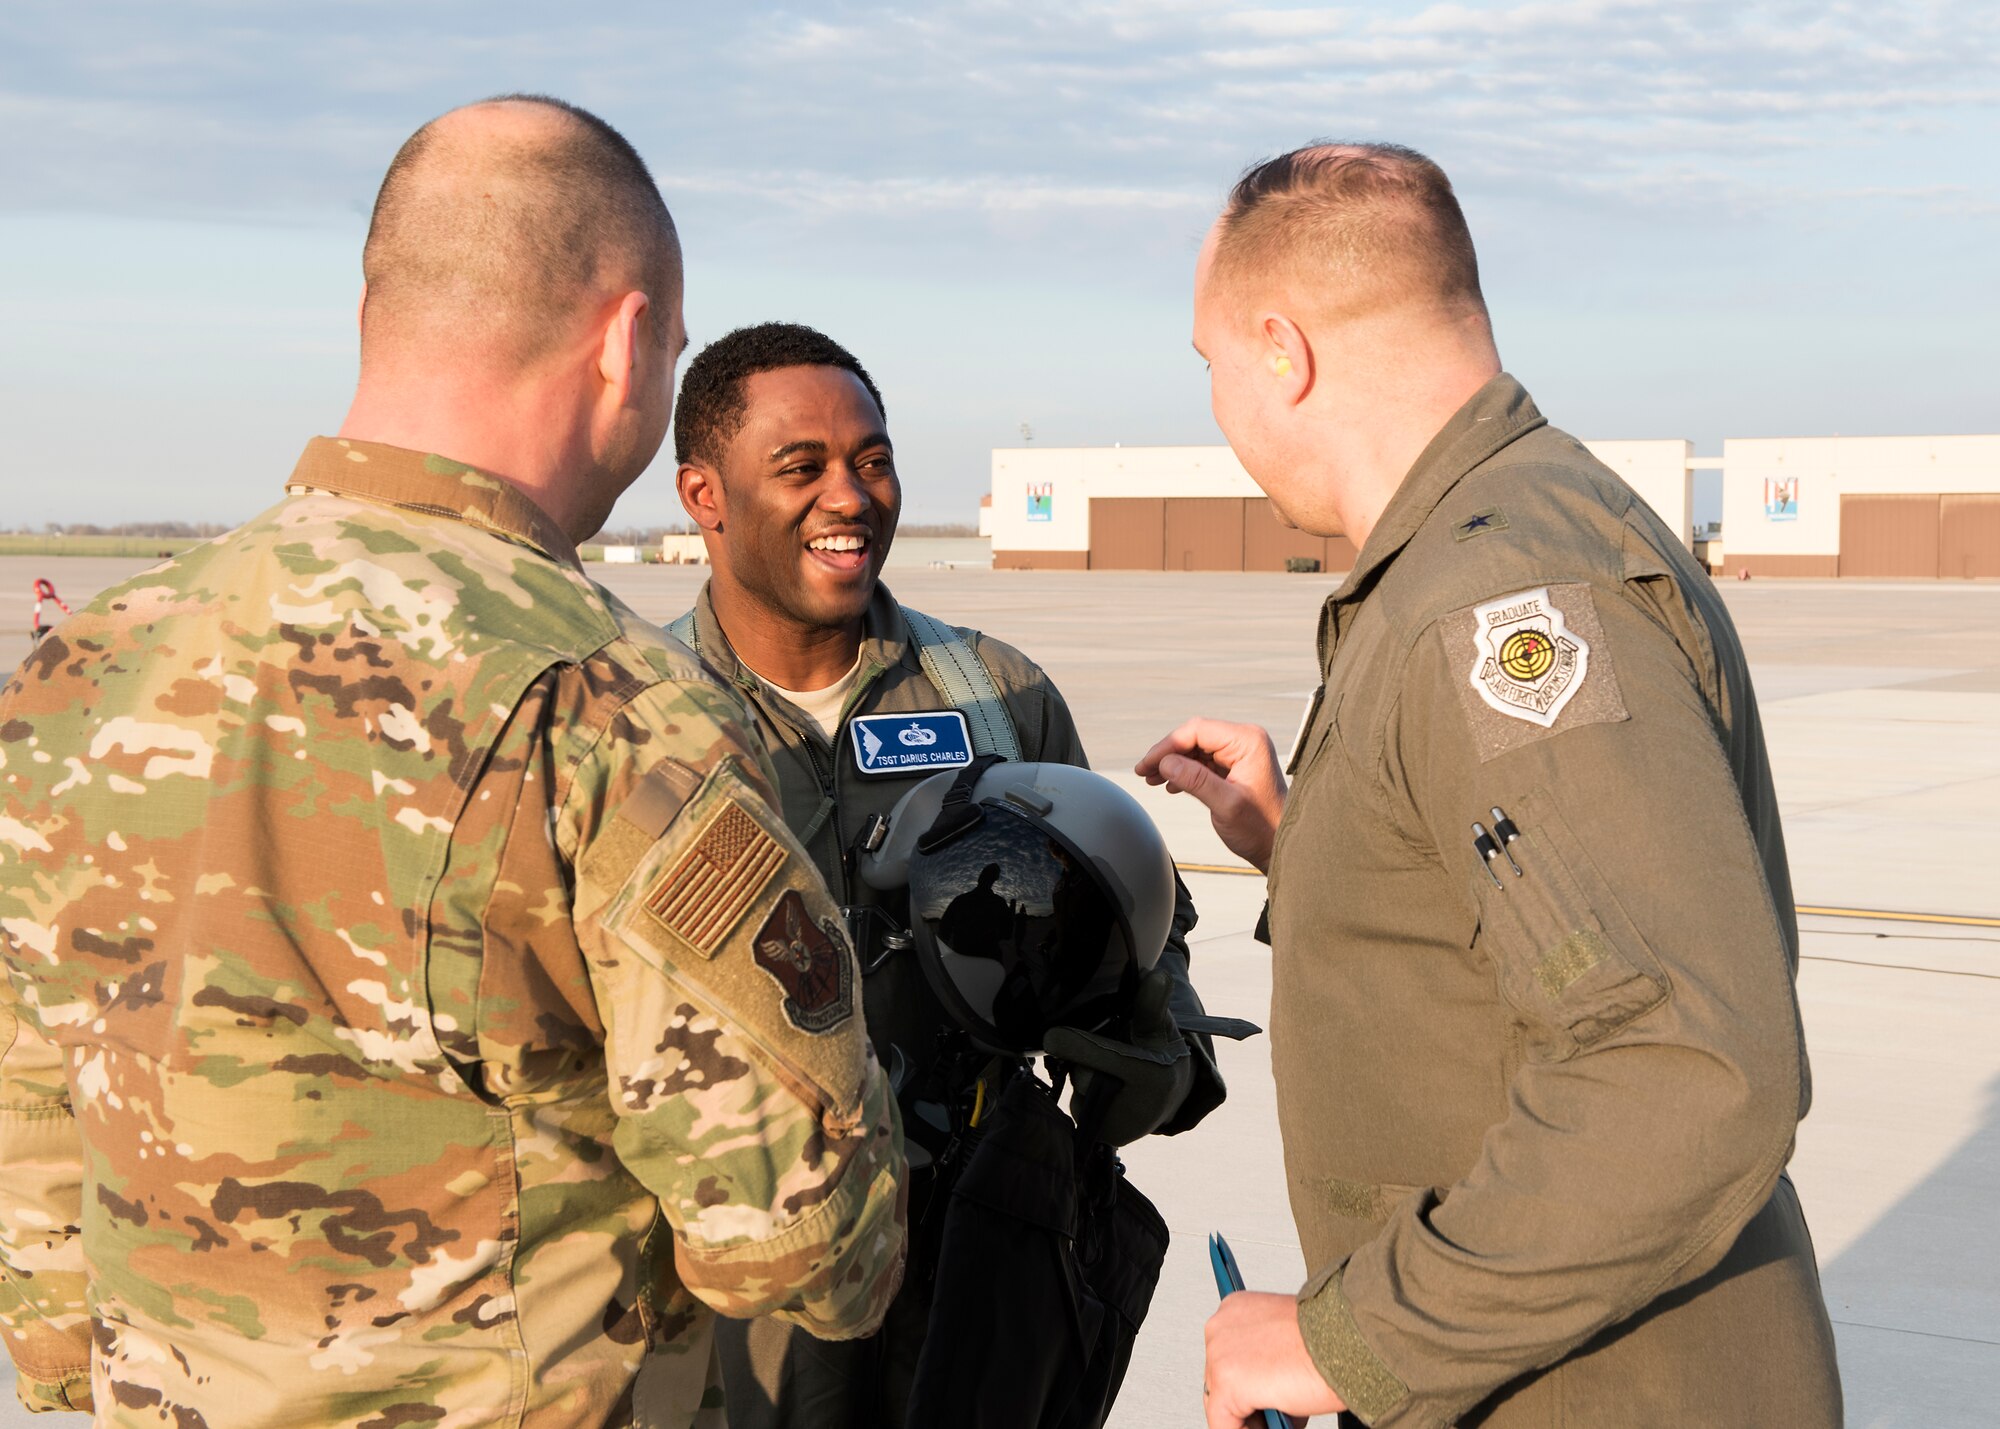 Tech. Sgt. Darius Charles, a Wing 2019 annual award winner, won an incentive flight in one of the base's B-2 Stealth Bombers.